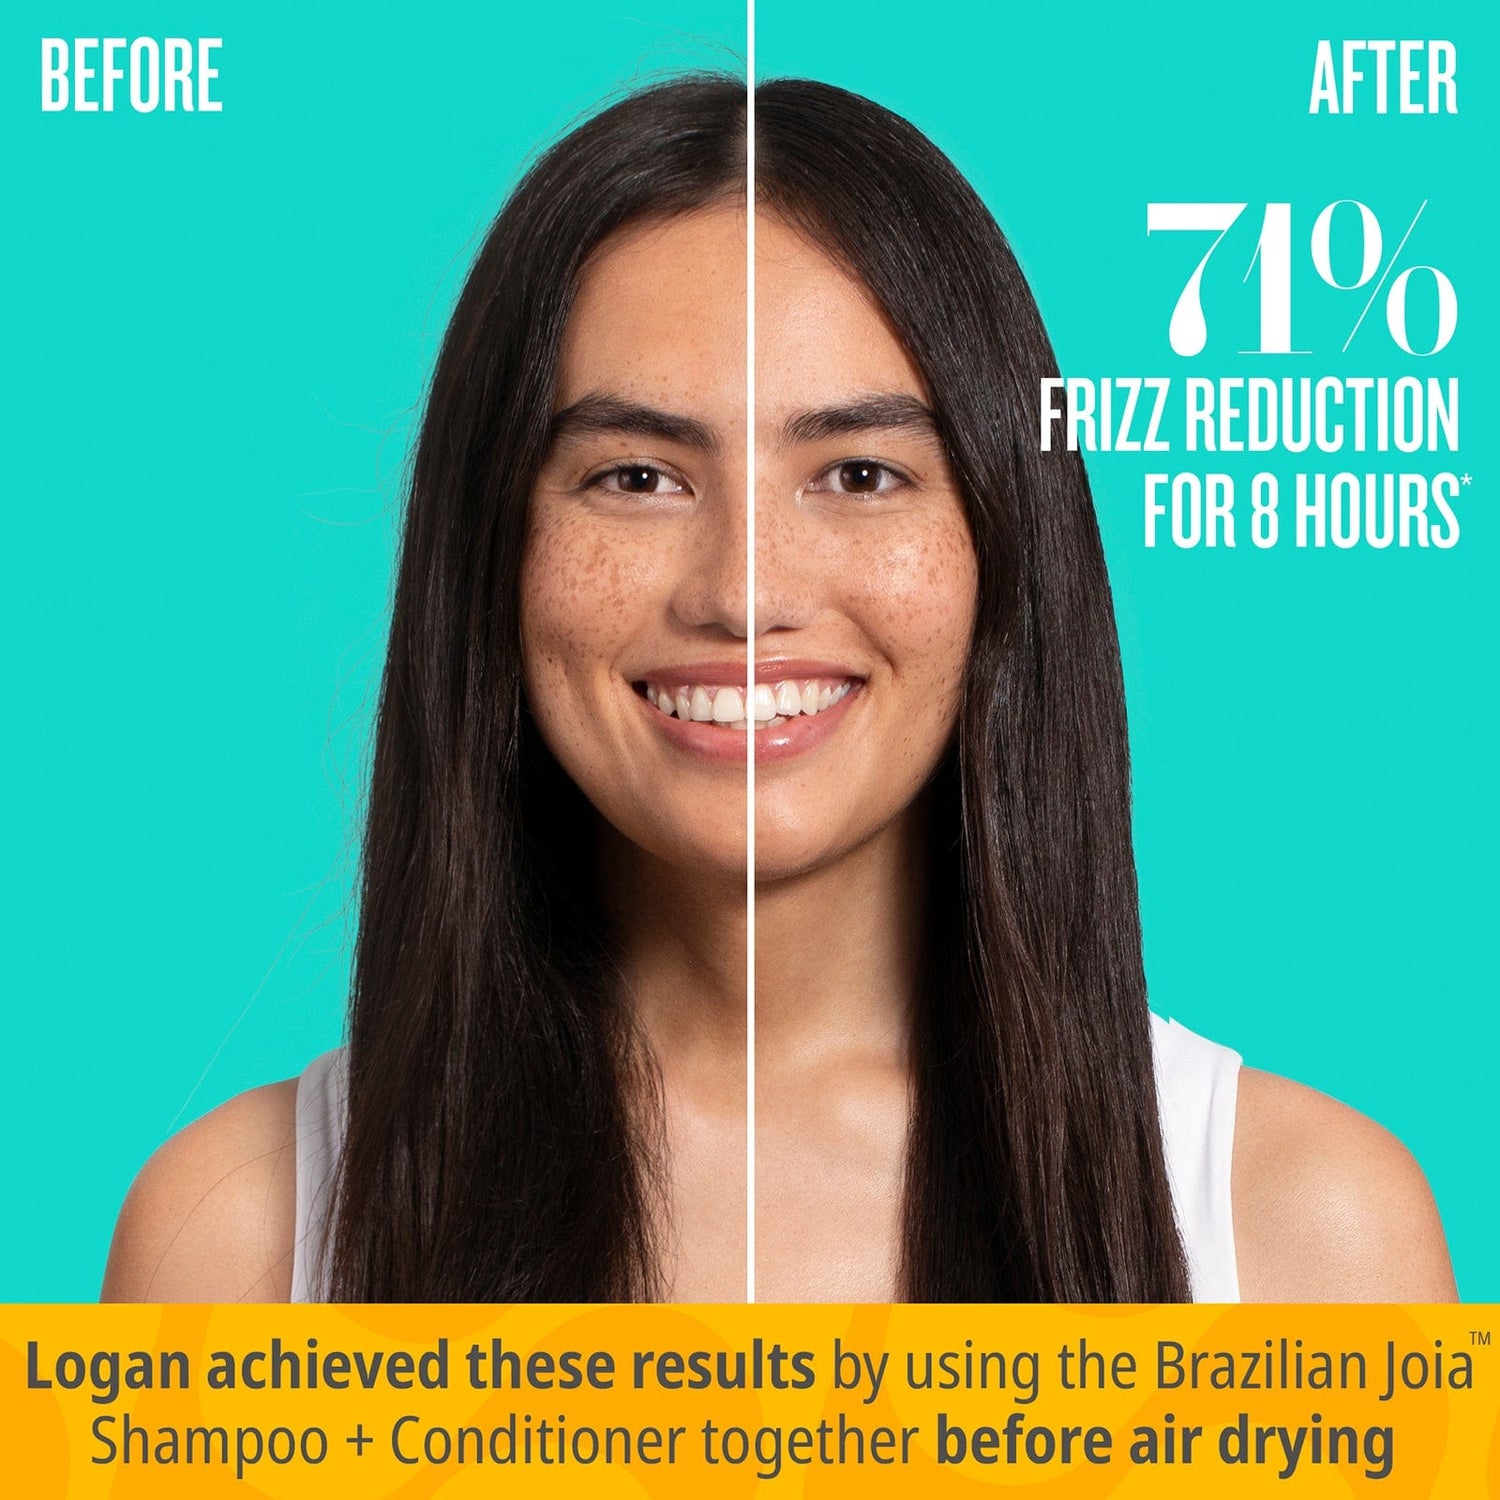 Before | After - 71% frizz reduction for 8 hours | Logan achieved these results by using Brazilian Joia™ Shampoo and Conditioner together before air drying